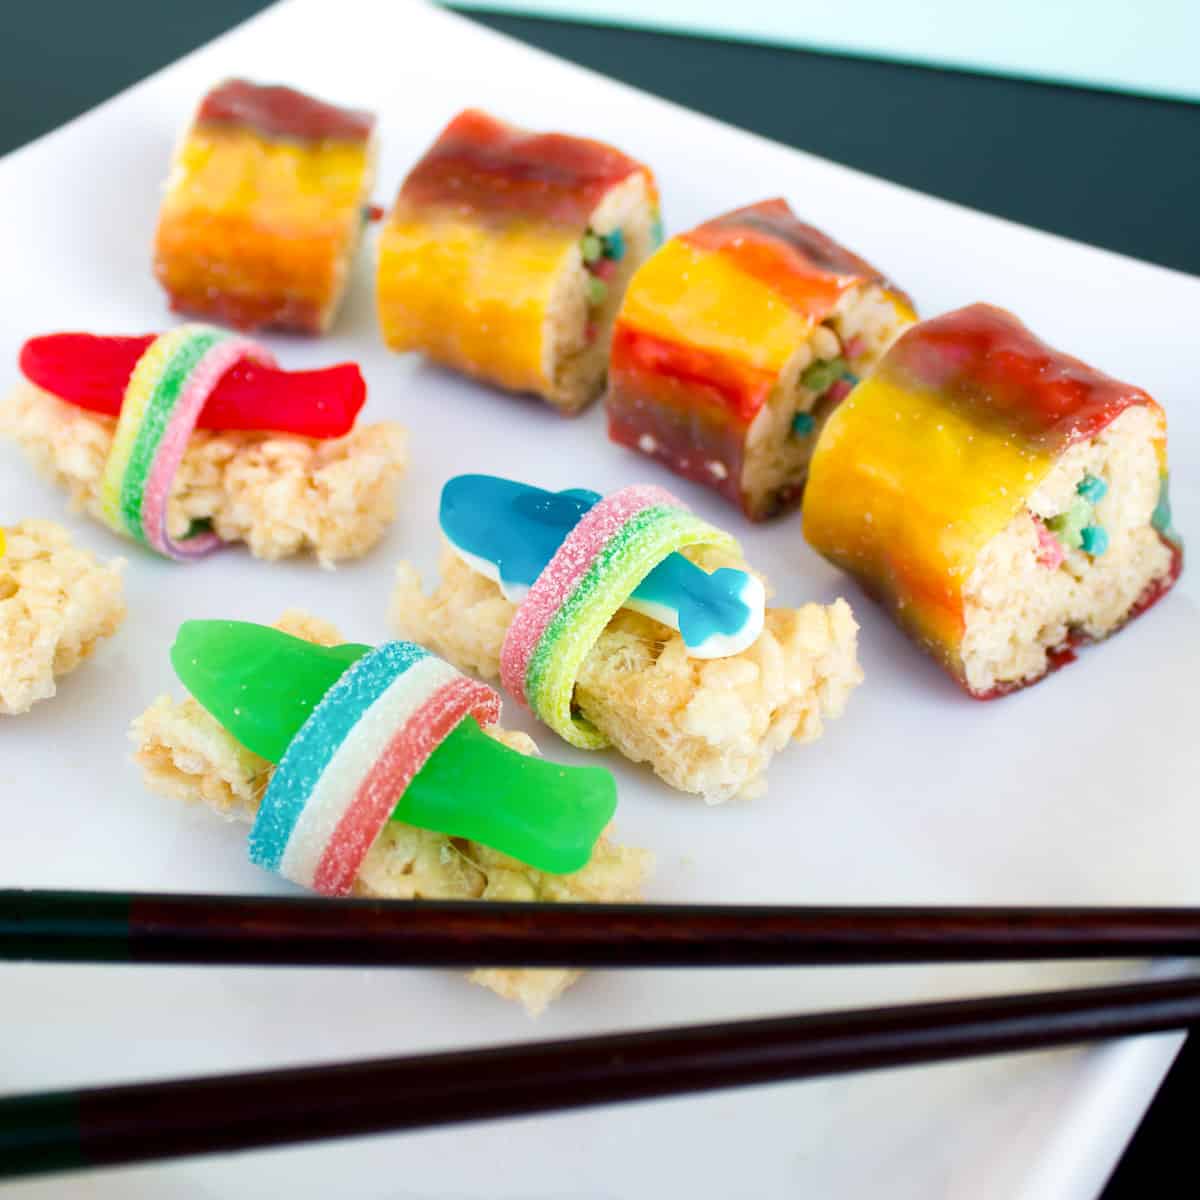 Instructions for how to make candy sushi with Rice Krispie treats, fruit roll ups, gummy worms, swedish fish, licorice strings and gummy sharks.